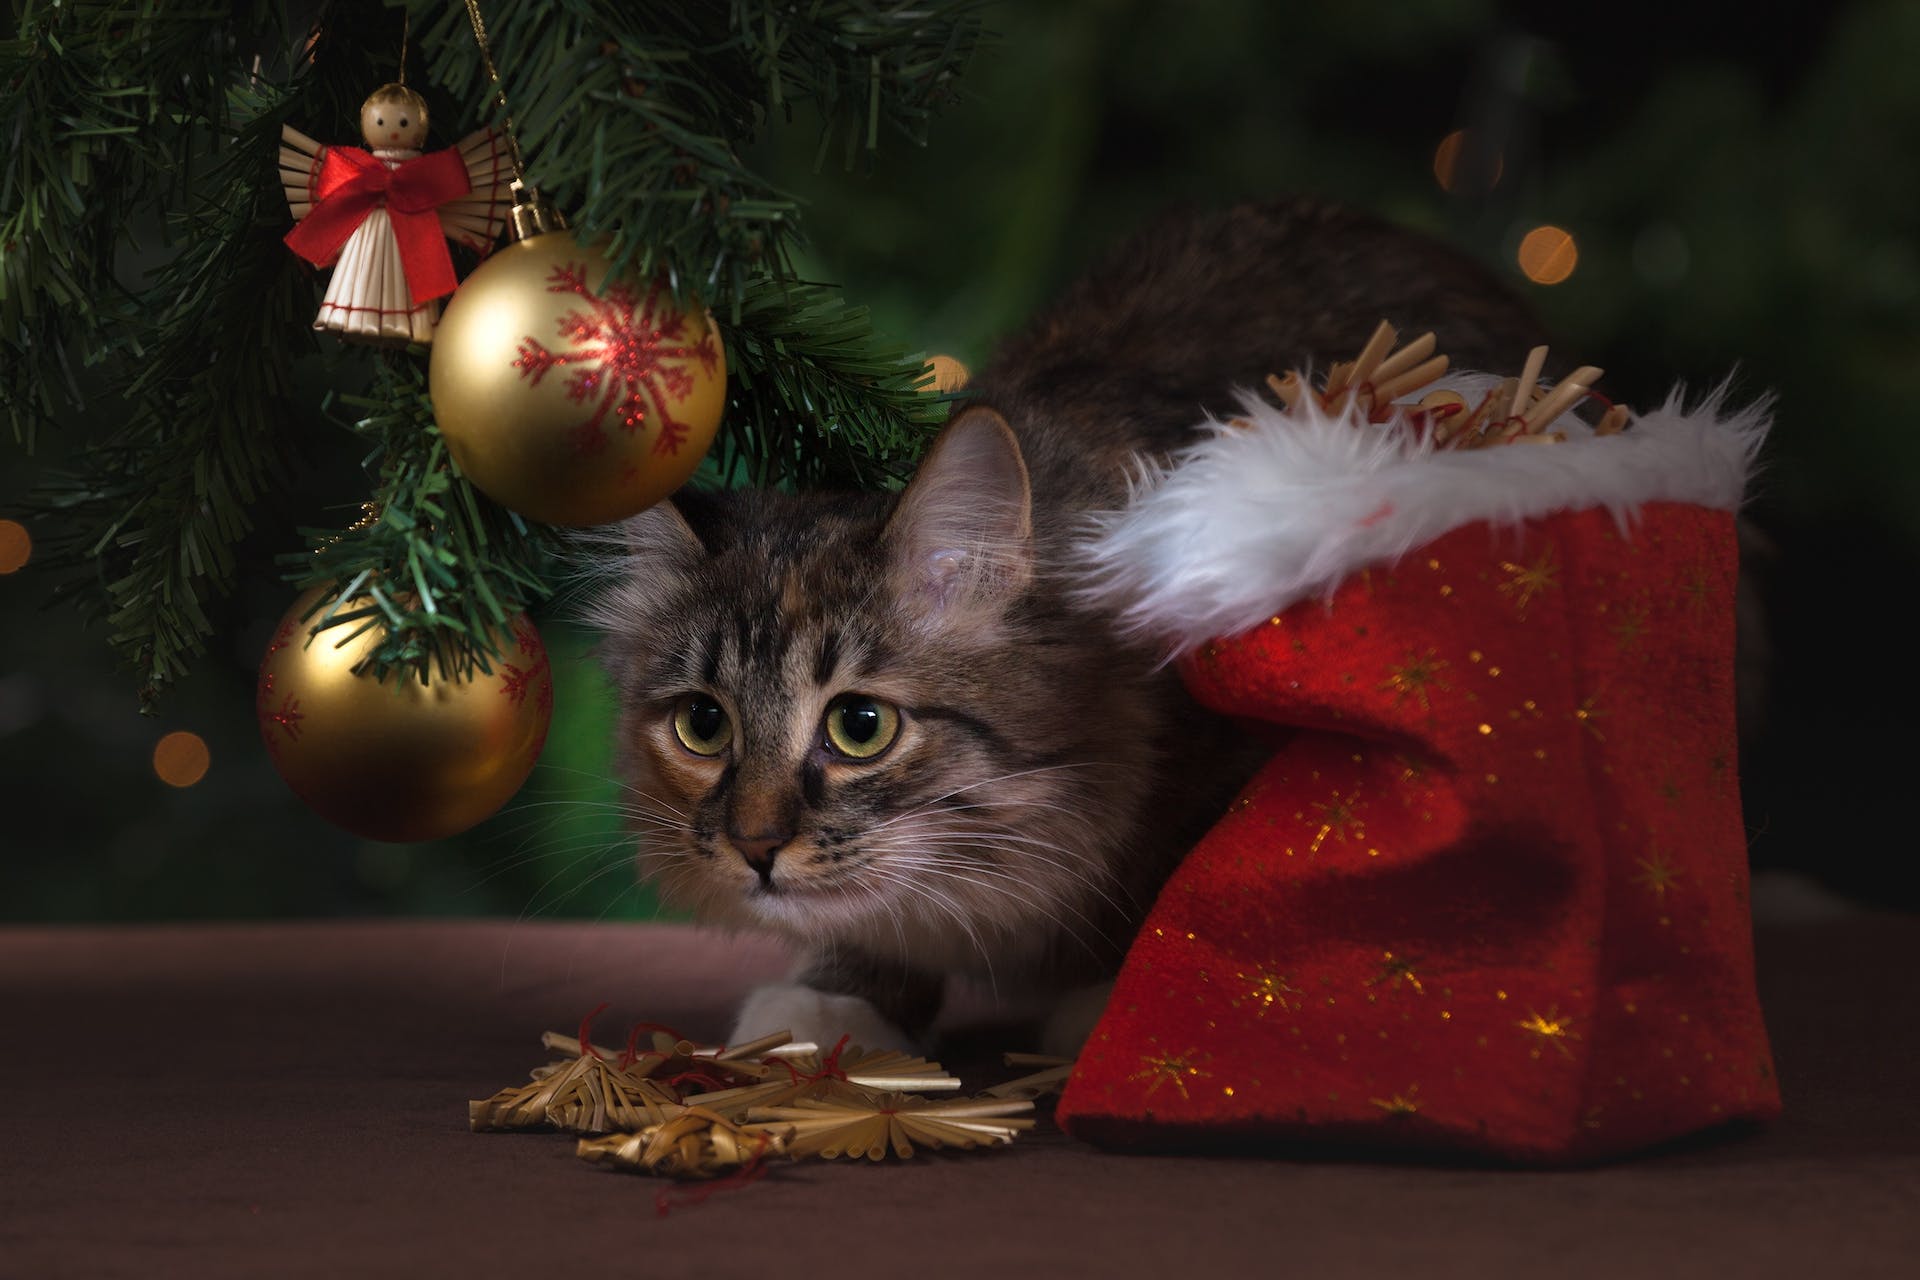 A cat sitting under a Christmas tree with Christmas decorations around